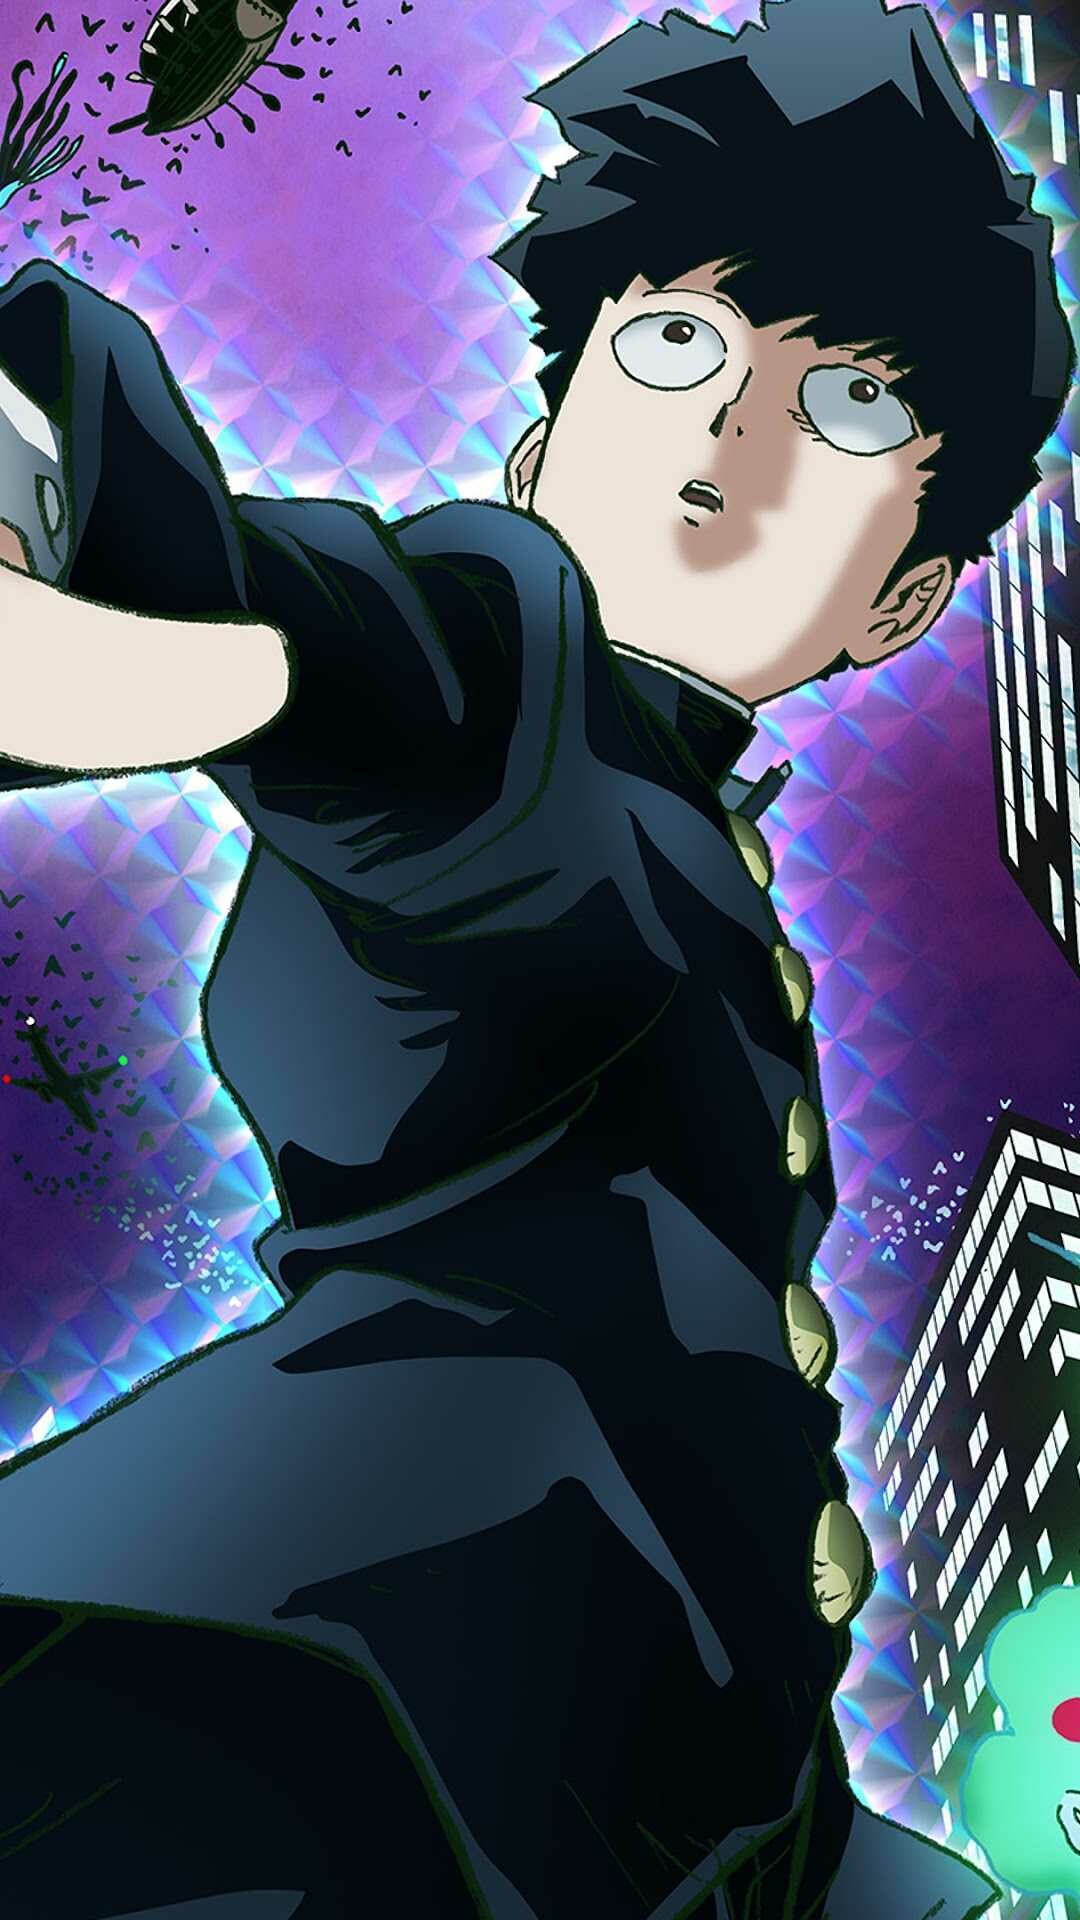 Mob Psycho 100: A young boy who will "explode" when something reaches 100, Cartoon. 1080x1920 Full HD Wallpaper.